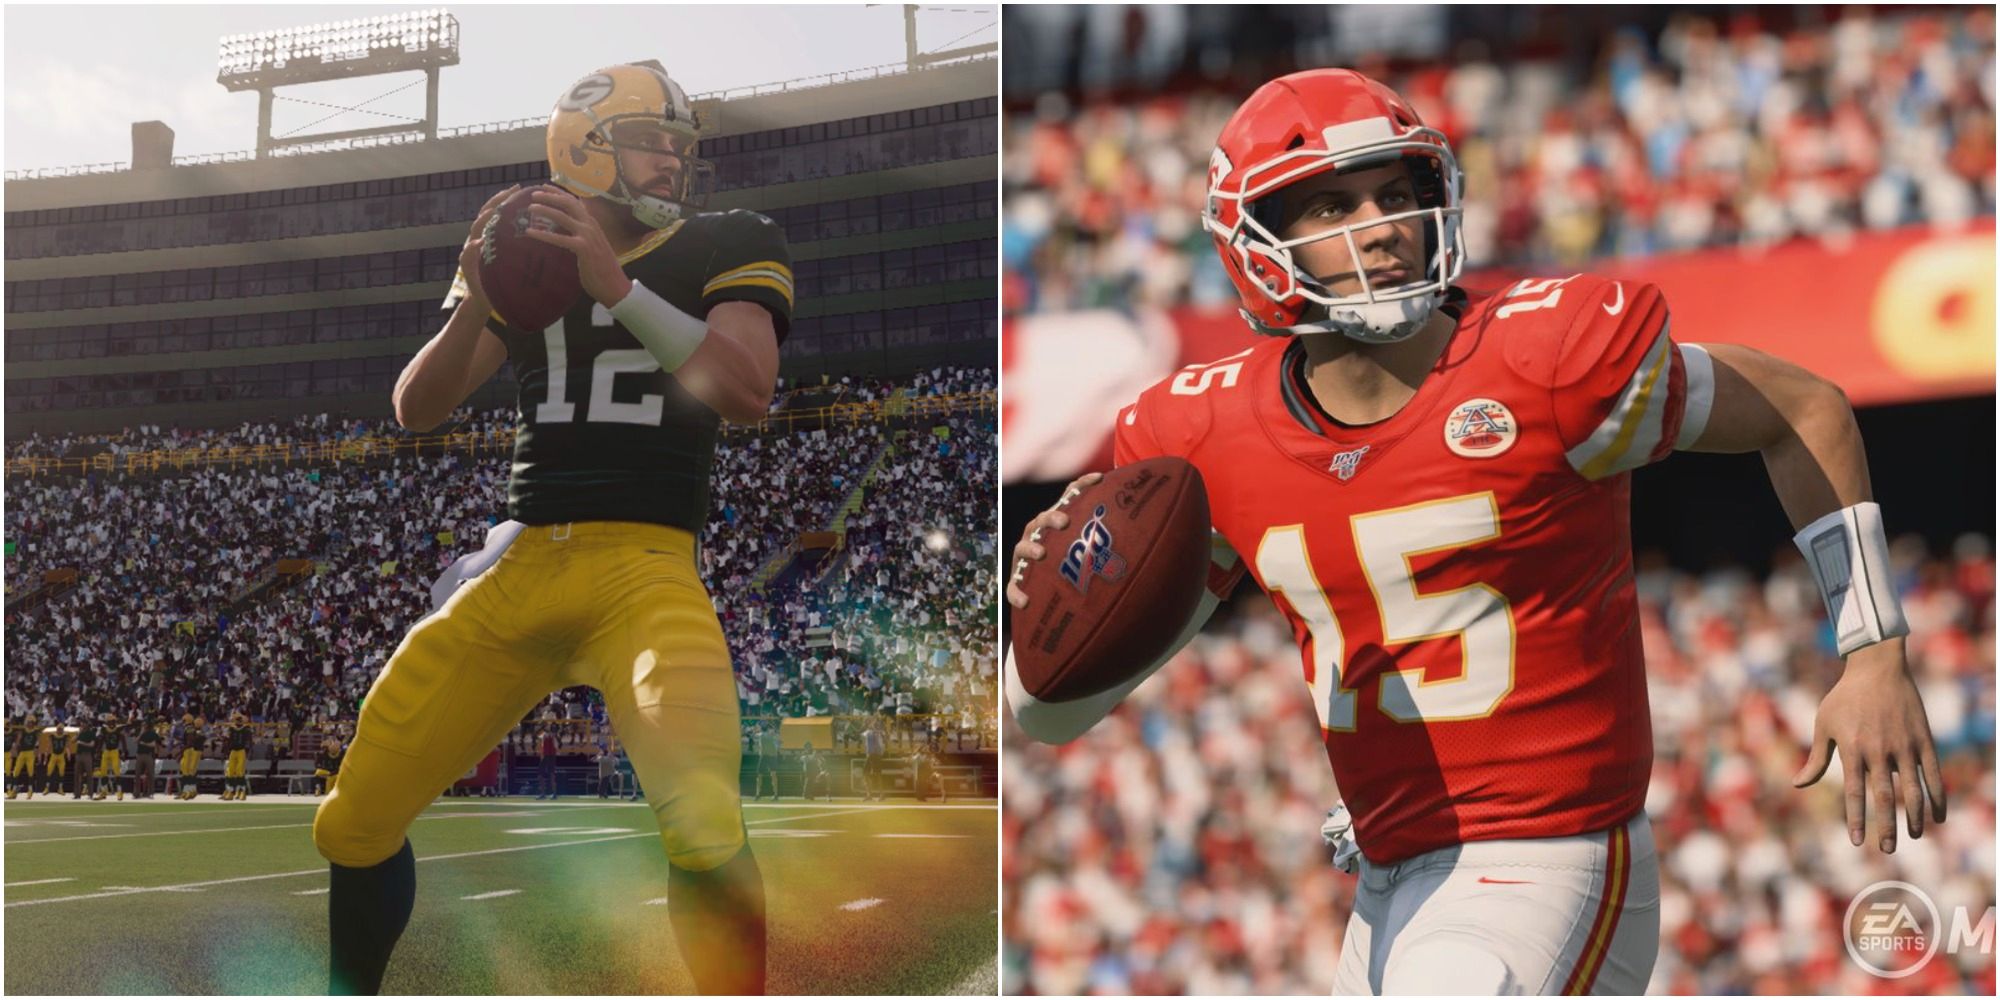 Madden Nfl 22 Highest Rated Qb Collage Aaron Rodgers And Patrick Mahomes